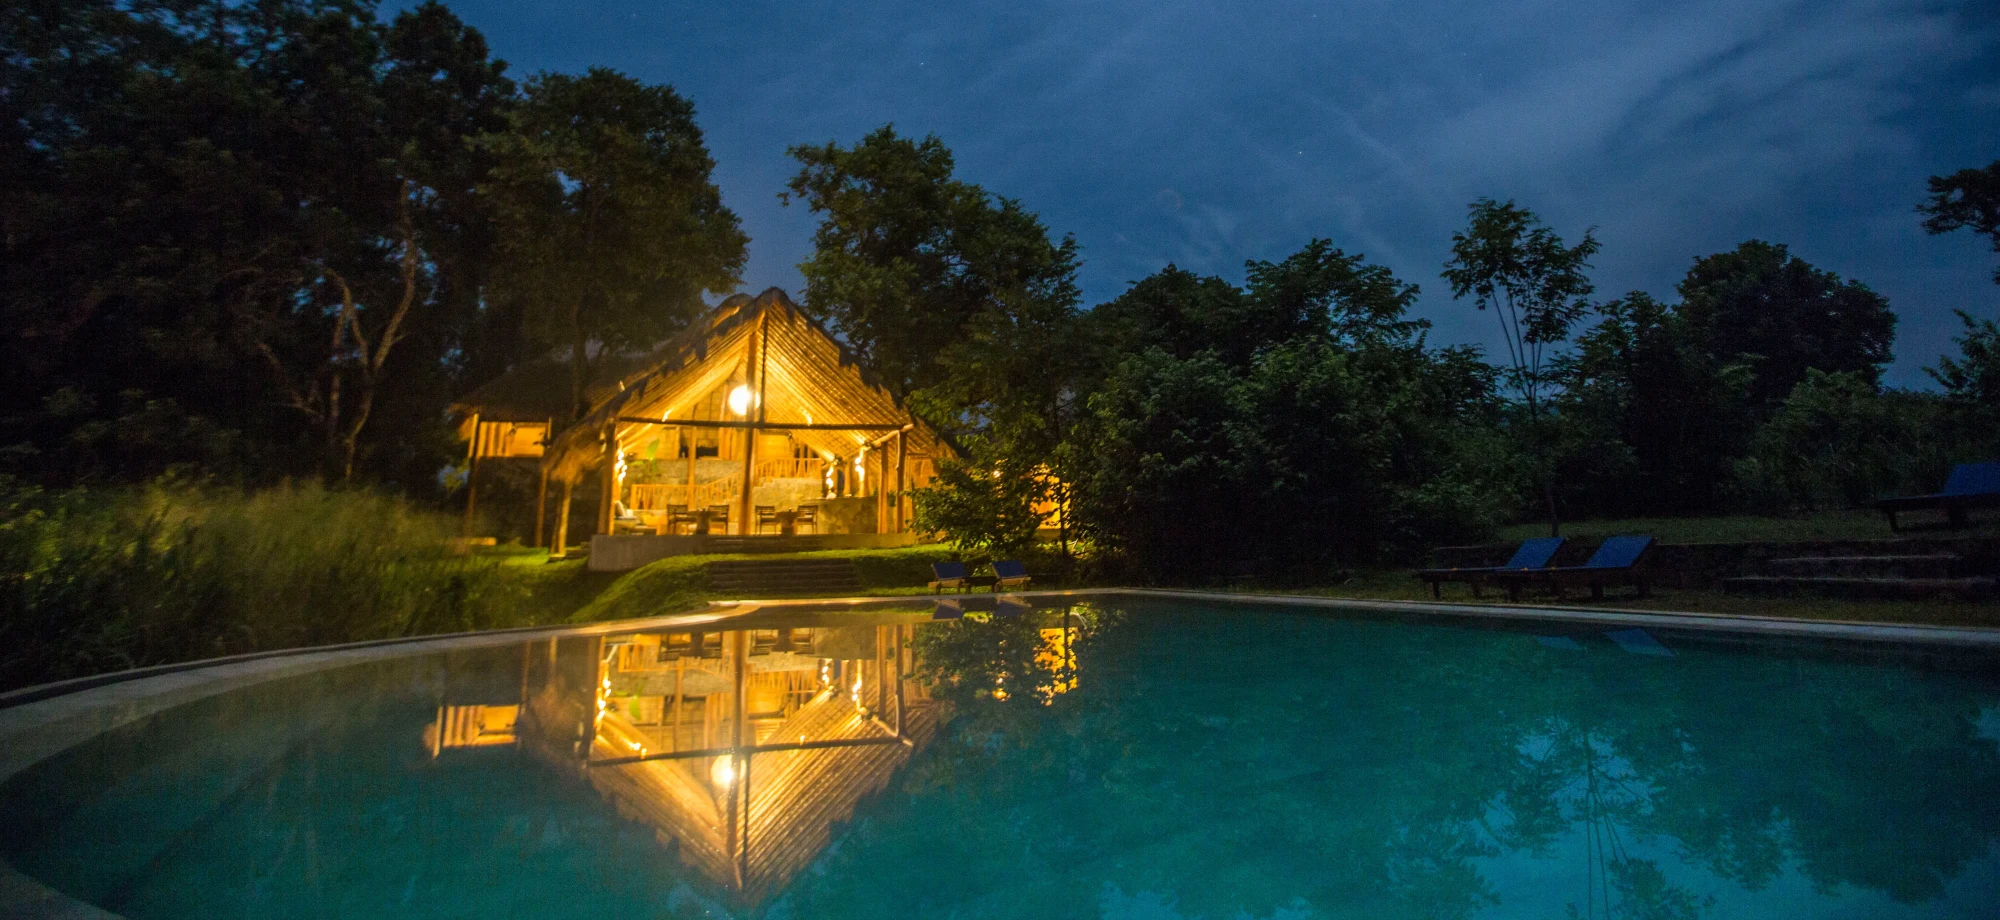 One of the huts at Gal Oya Lodge backs onto the outdoor pool and is lit up with warm lighting during a gentle evening.